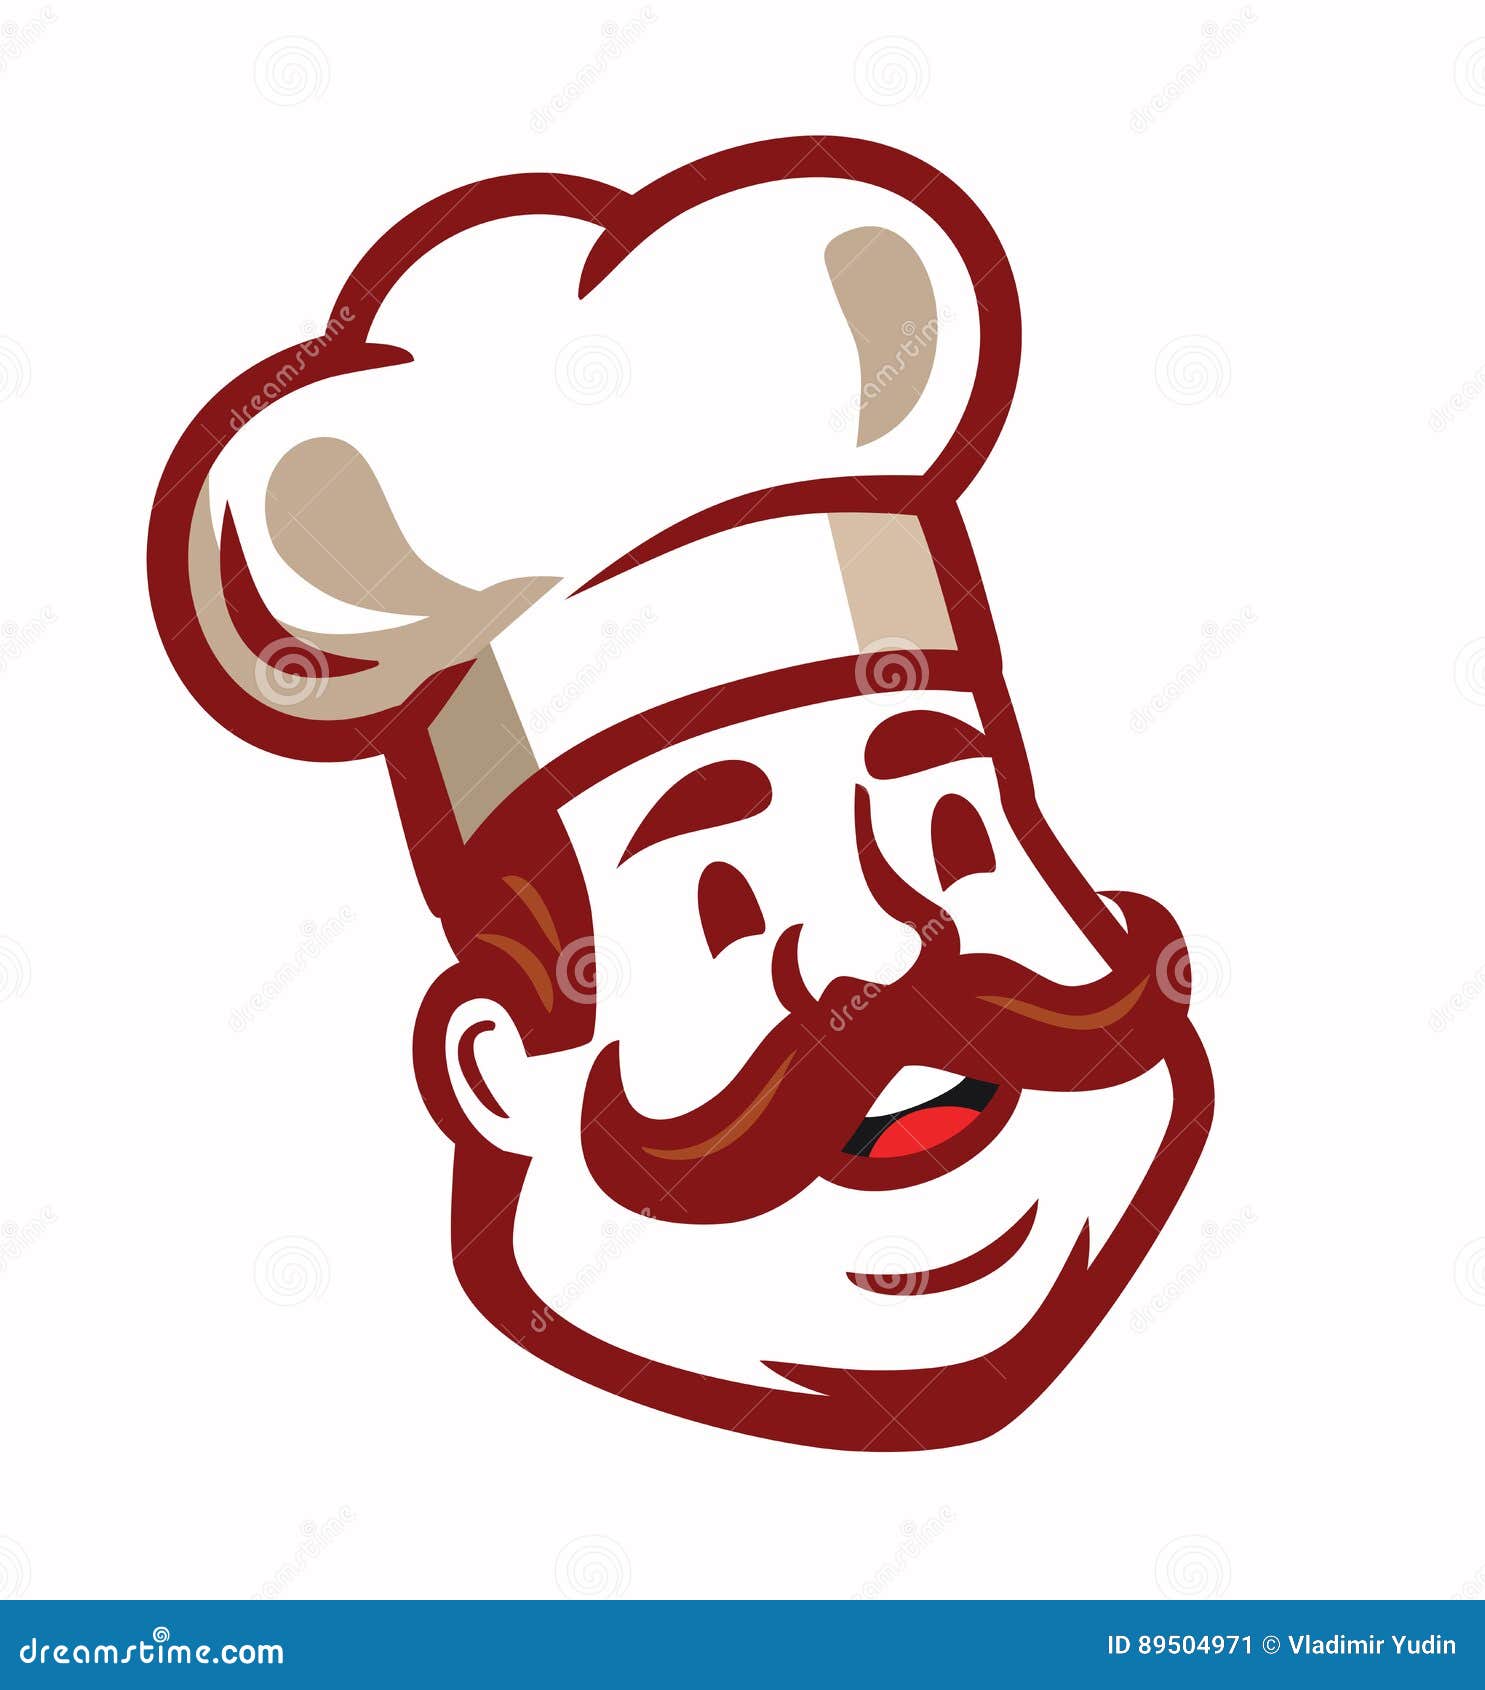 Chef icon emblem stock vector. Illustration of concept - 89504971